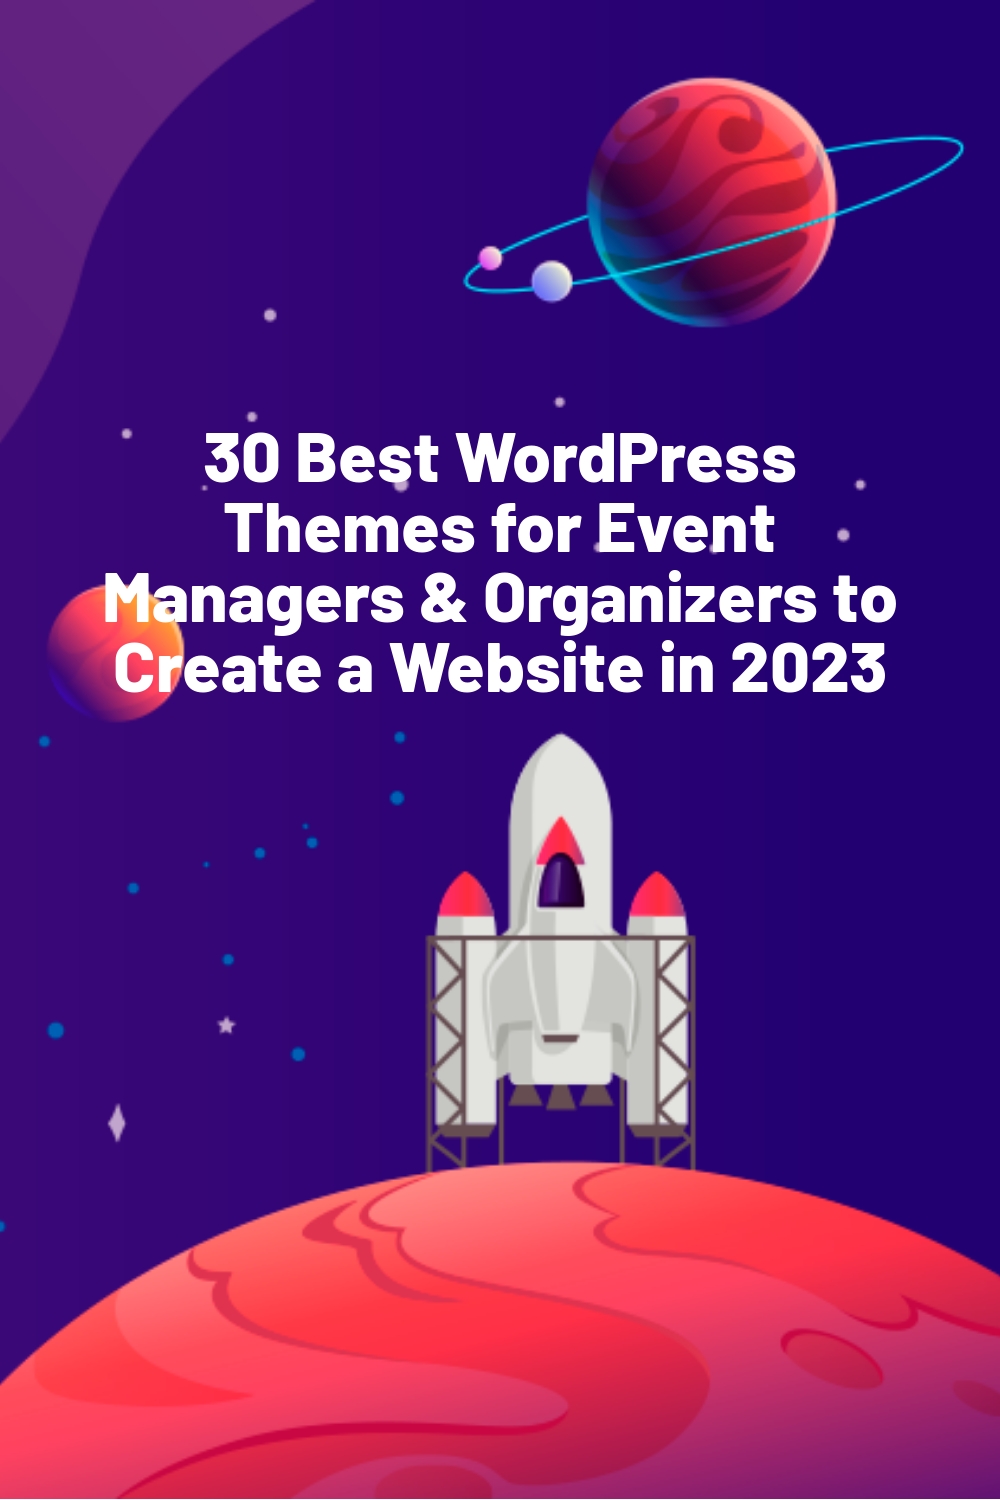 30 Best WordPress Themes for Event Managers & Organizers to Create a Website in 2023